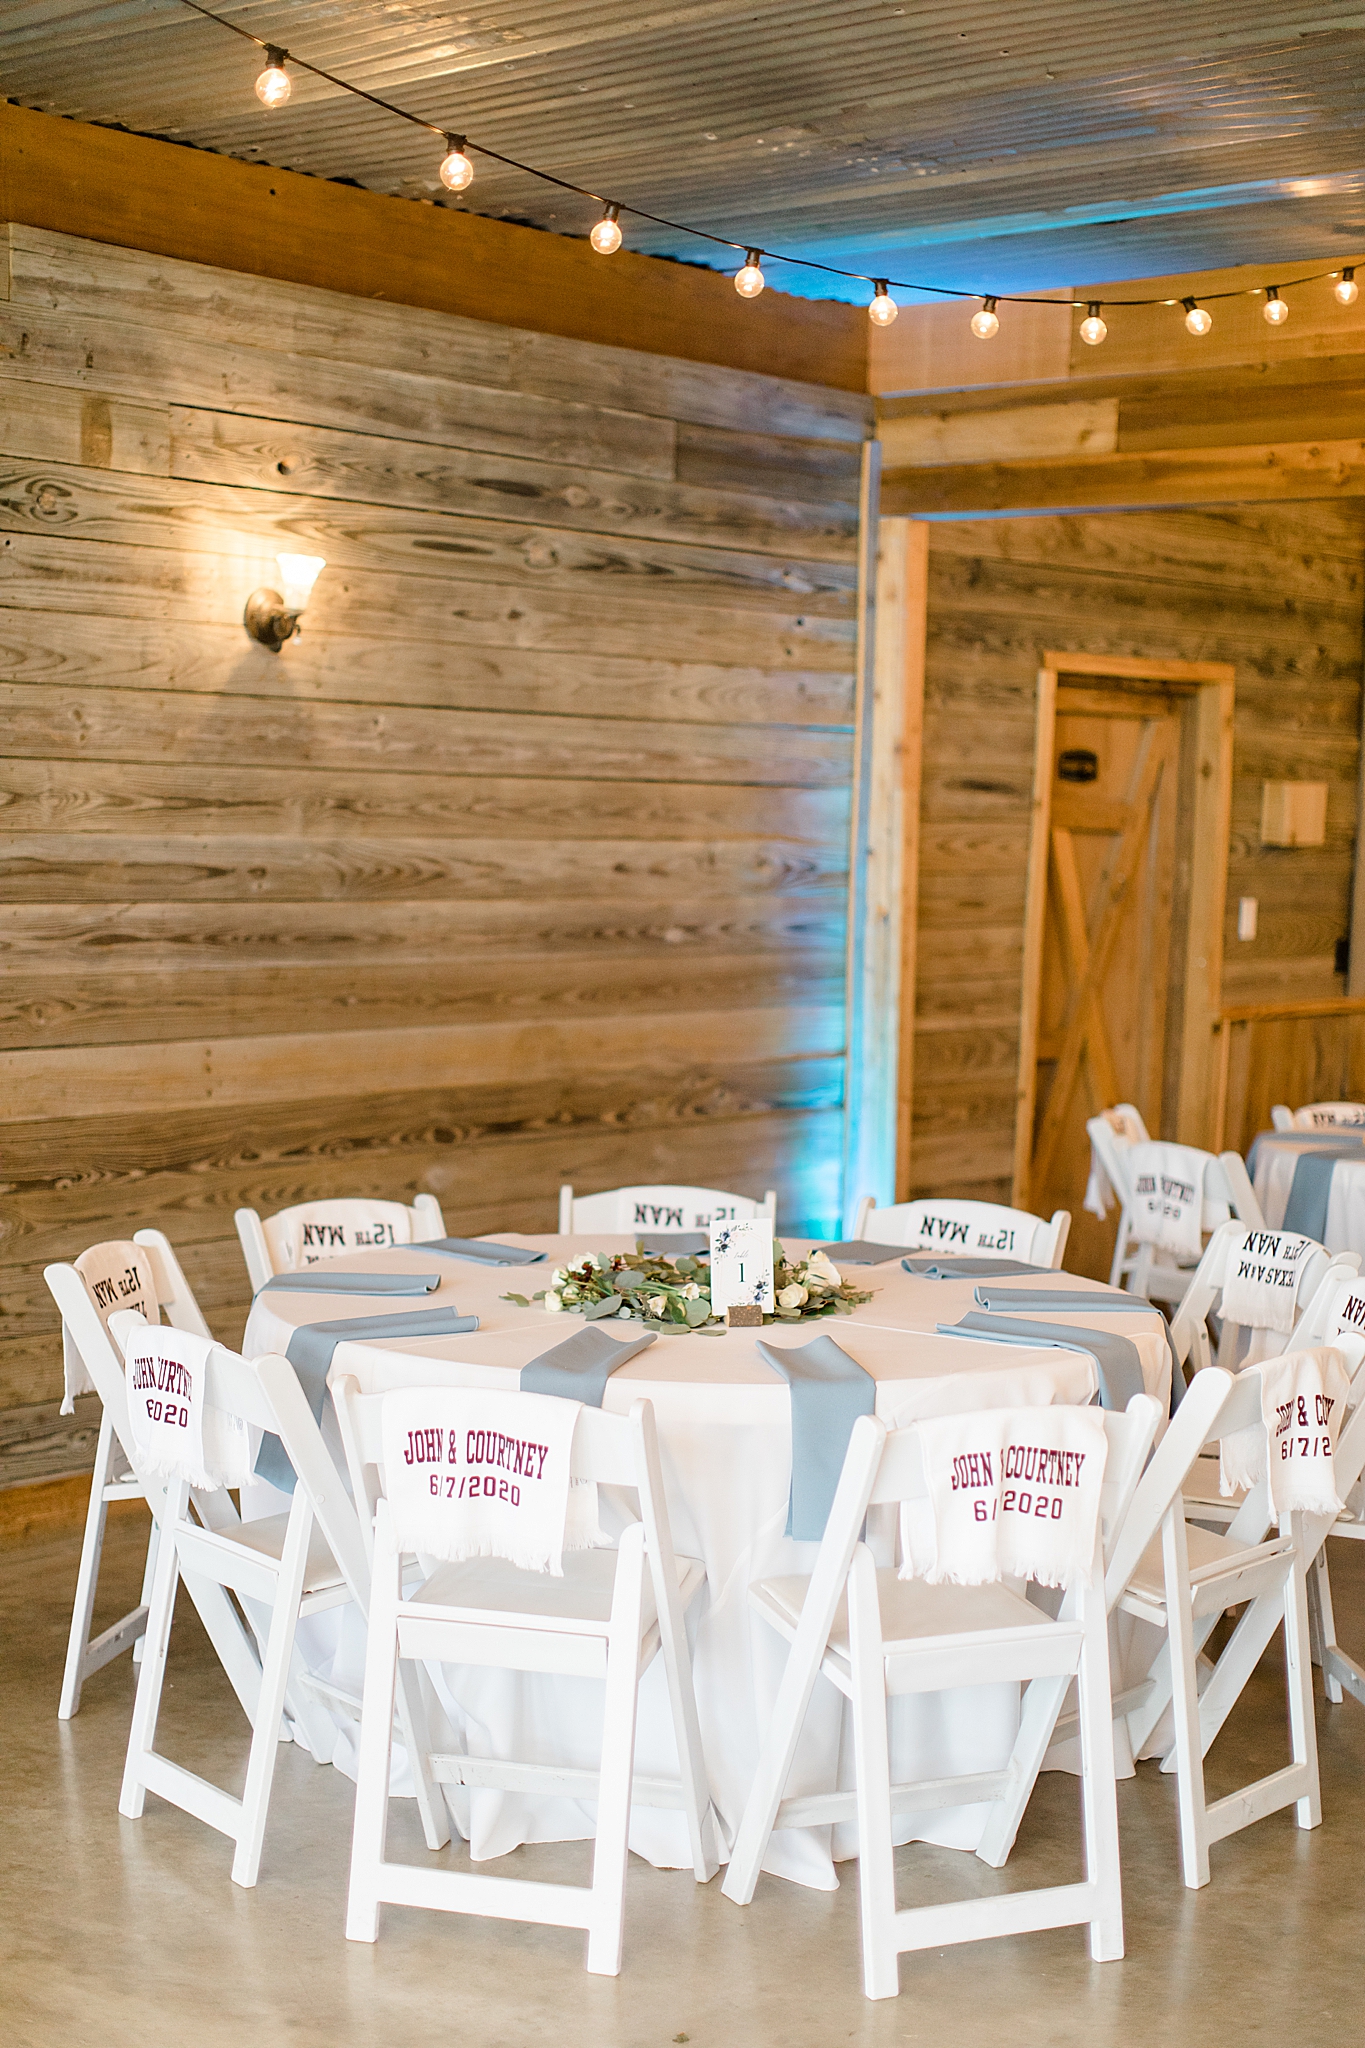 tables with blue napkins and towel favors for Rustic Grace Estate wedding